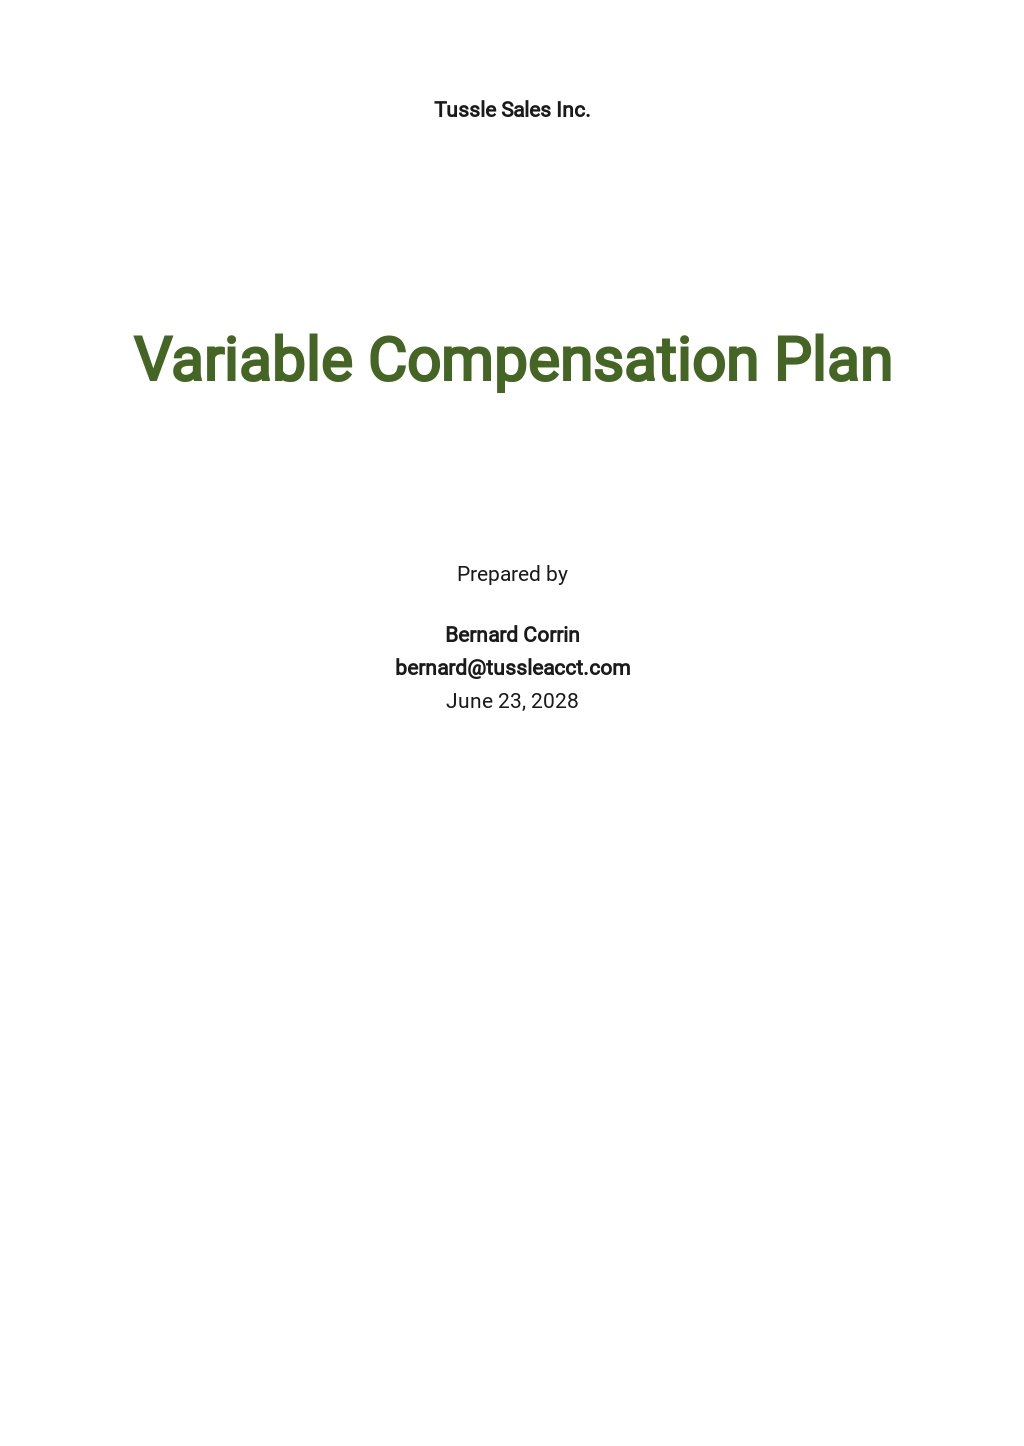 Free Compensation Plan Templates, 12+ Download in Word, Google Docs